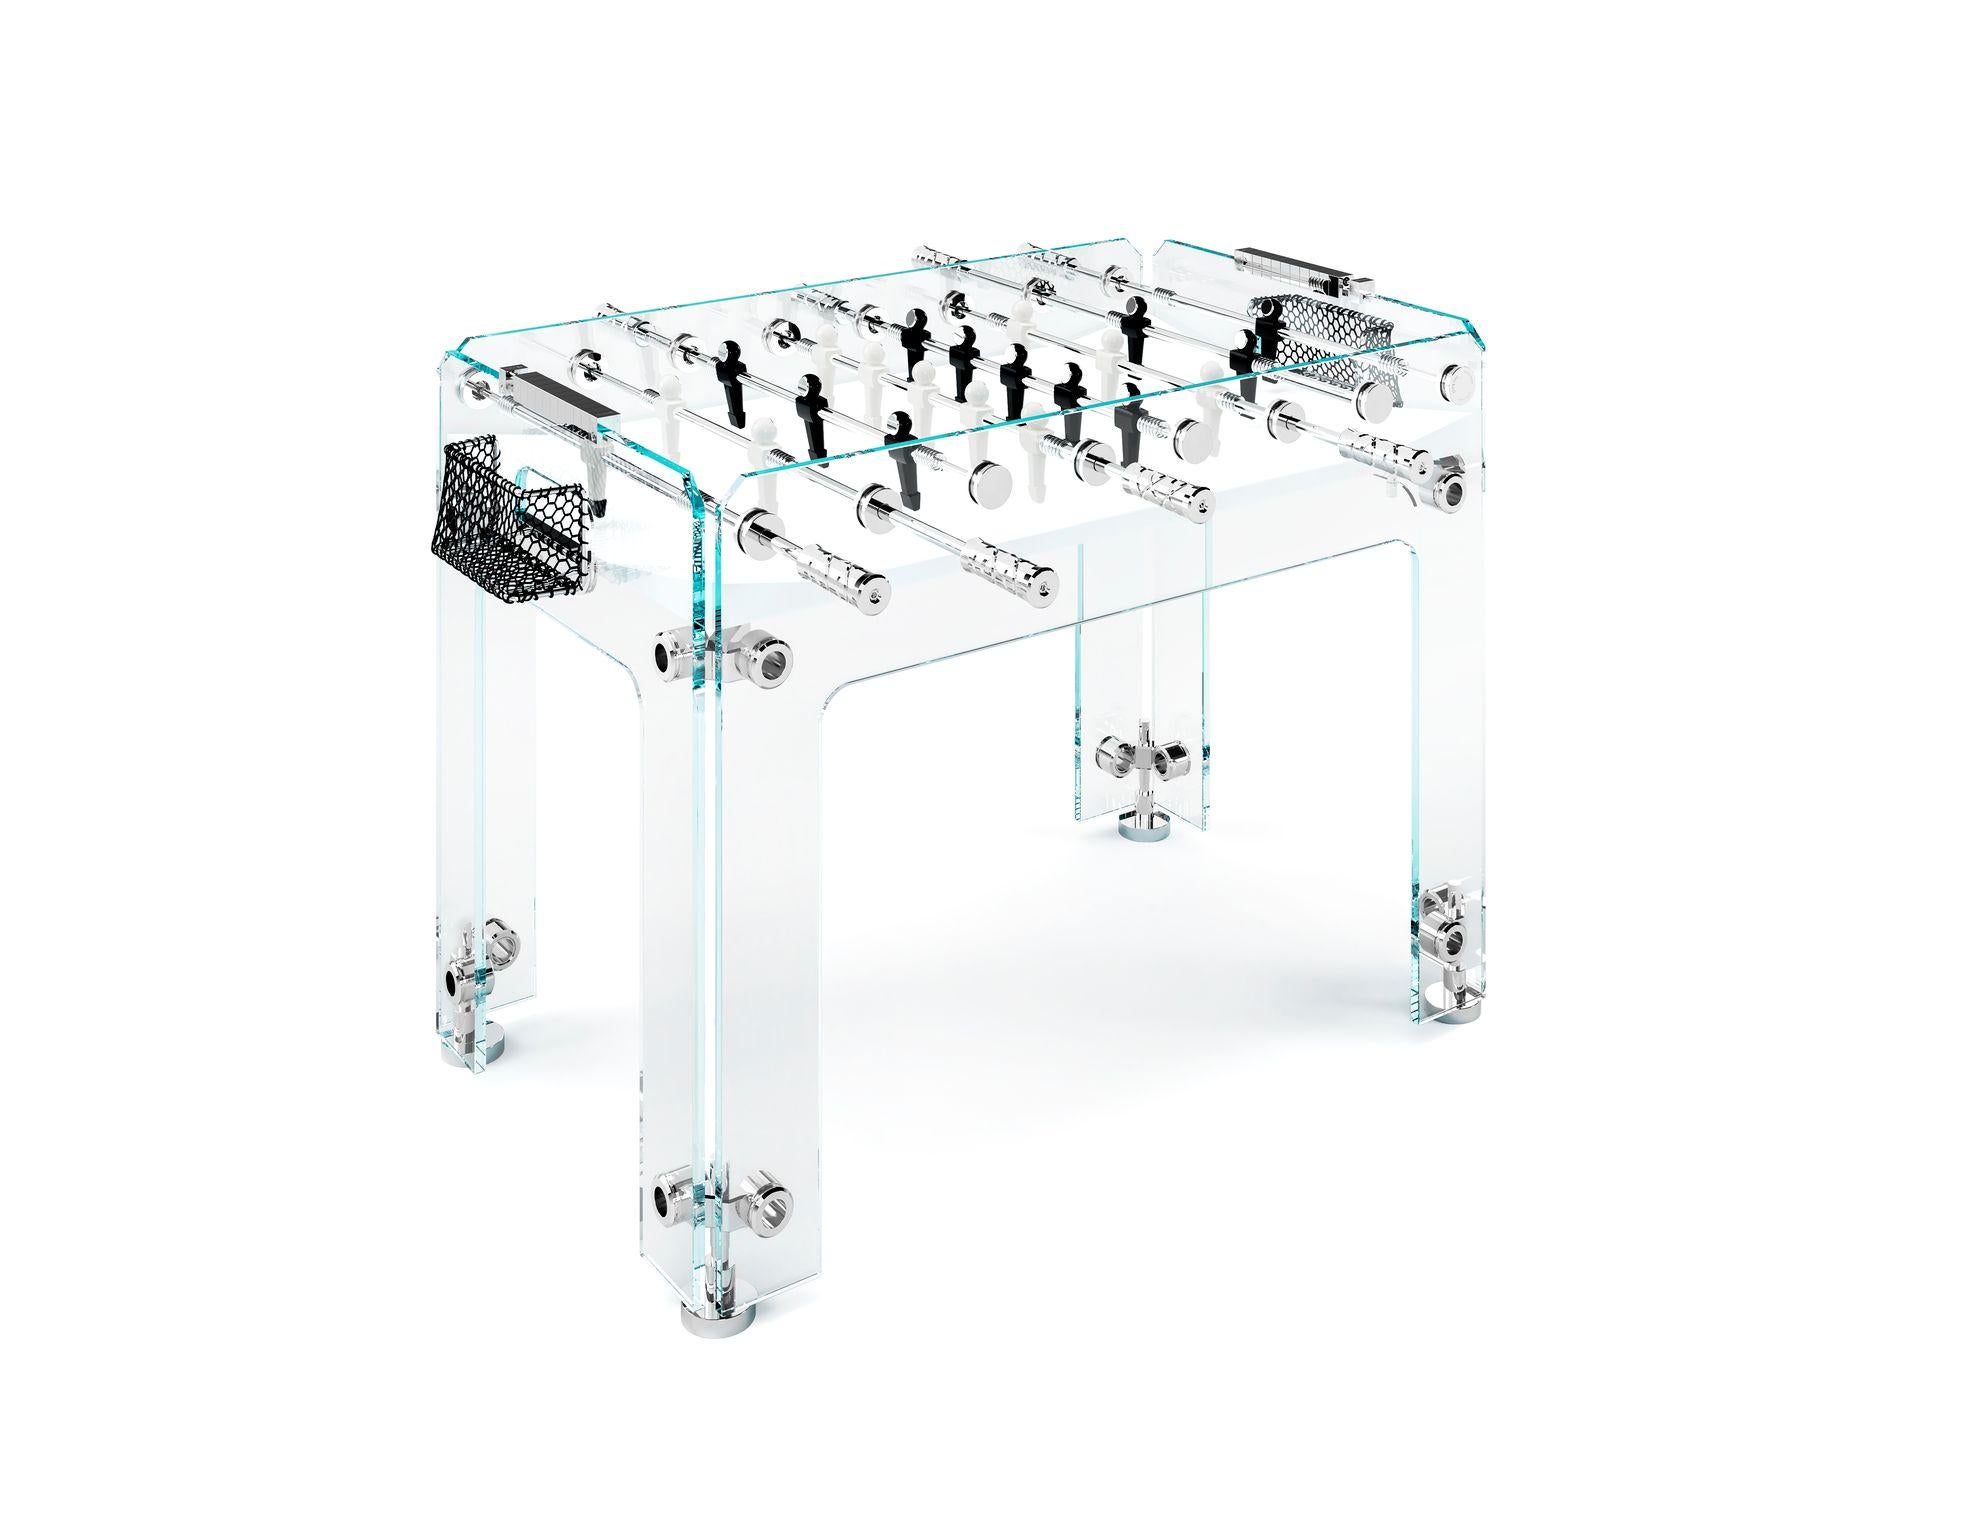 Cristallino Outdoor Foosball designed by Teckell. The playing field is structured with white Corian and teams of players are covered with black or white epoxy. Chromes brass is used for feet, handles, and joints. Telescopic bars are structured with